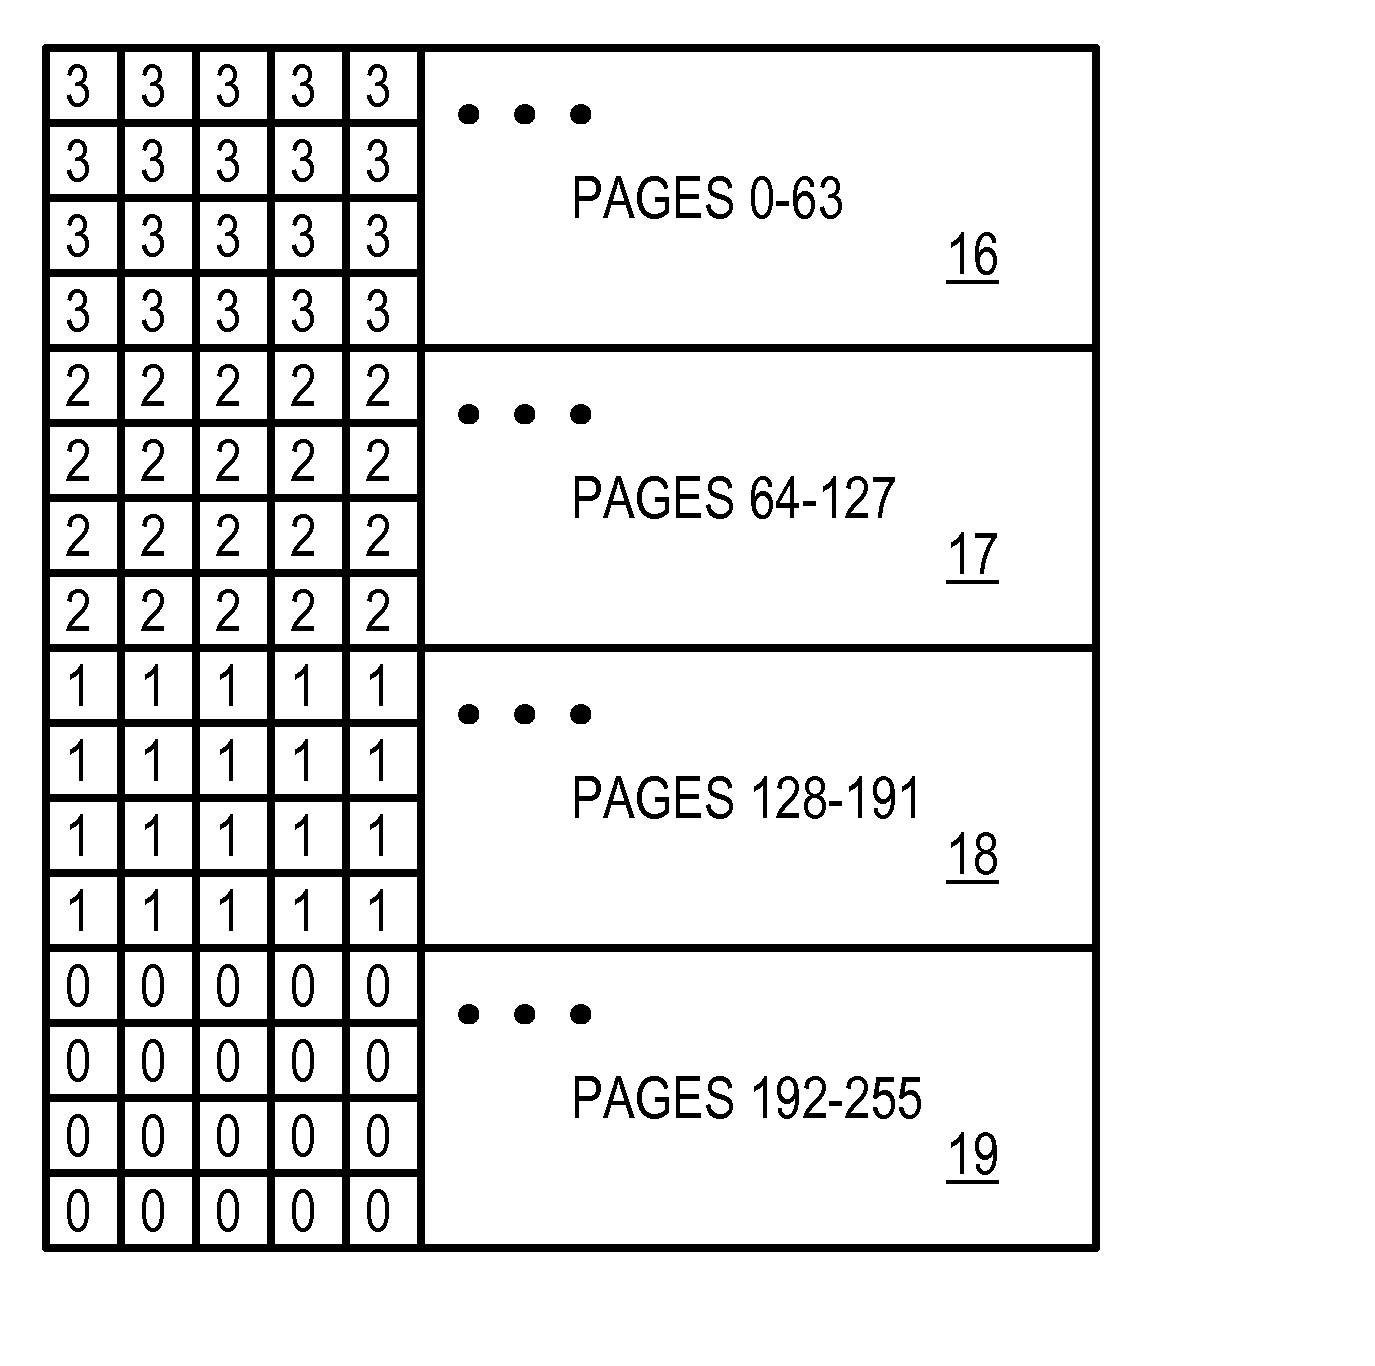 Cell-Downgrading and Reference-Voltage Adjustment for a Multi-Bit-Cell Flash Memory